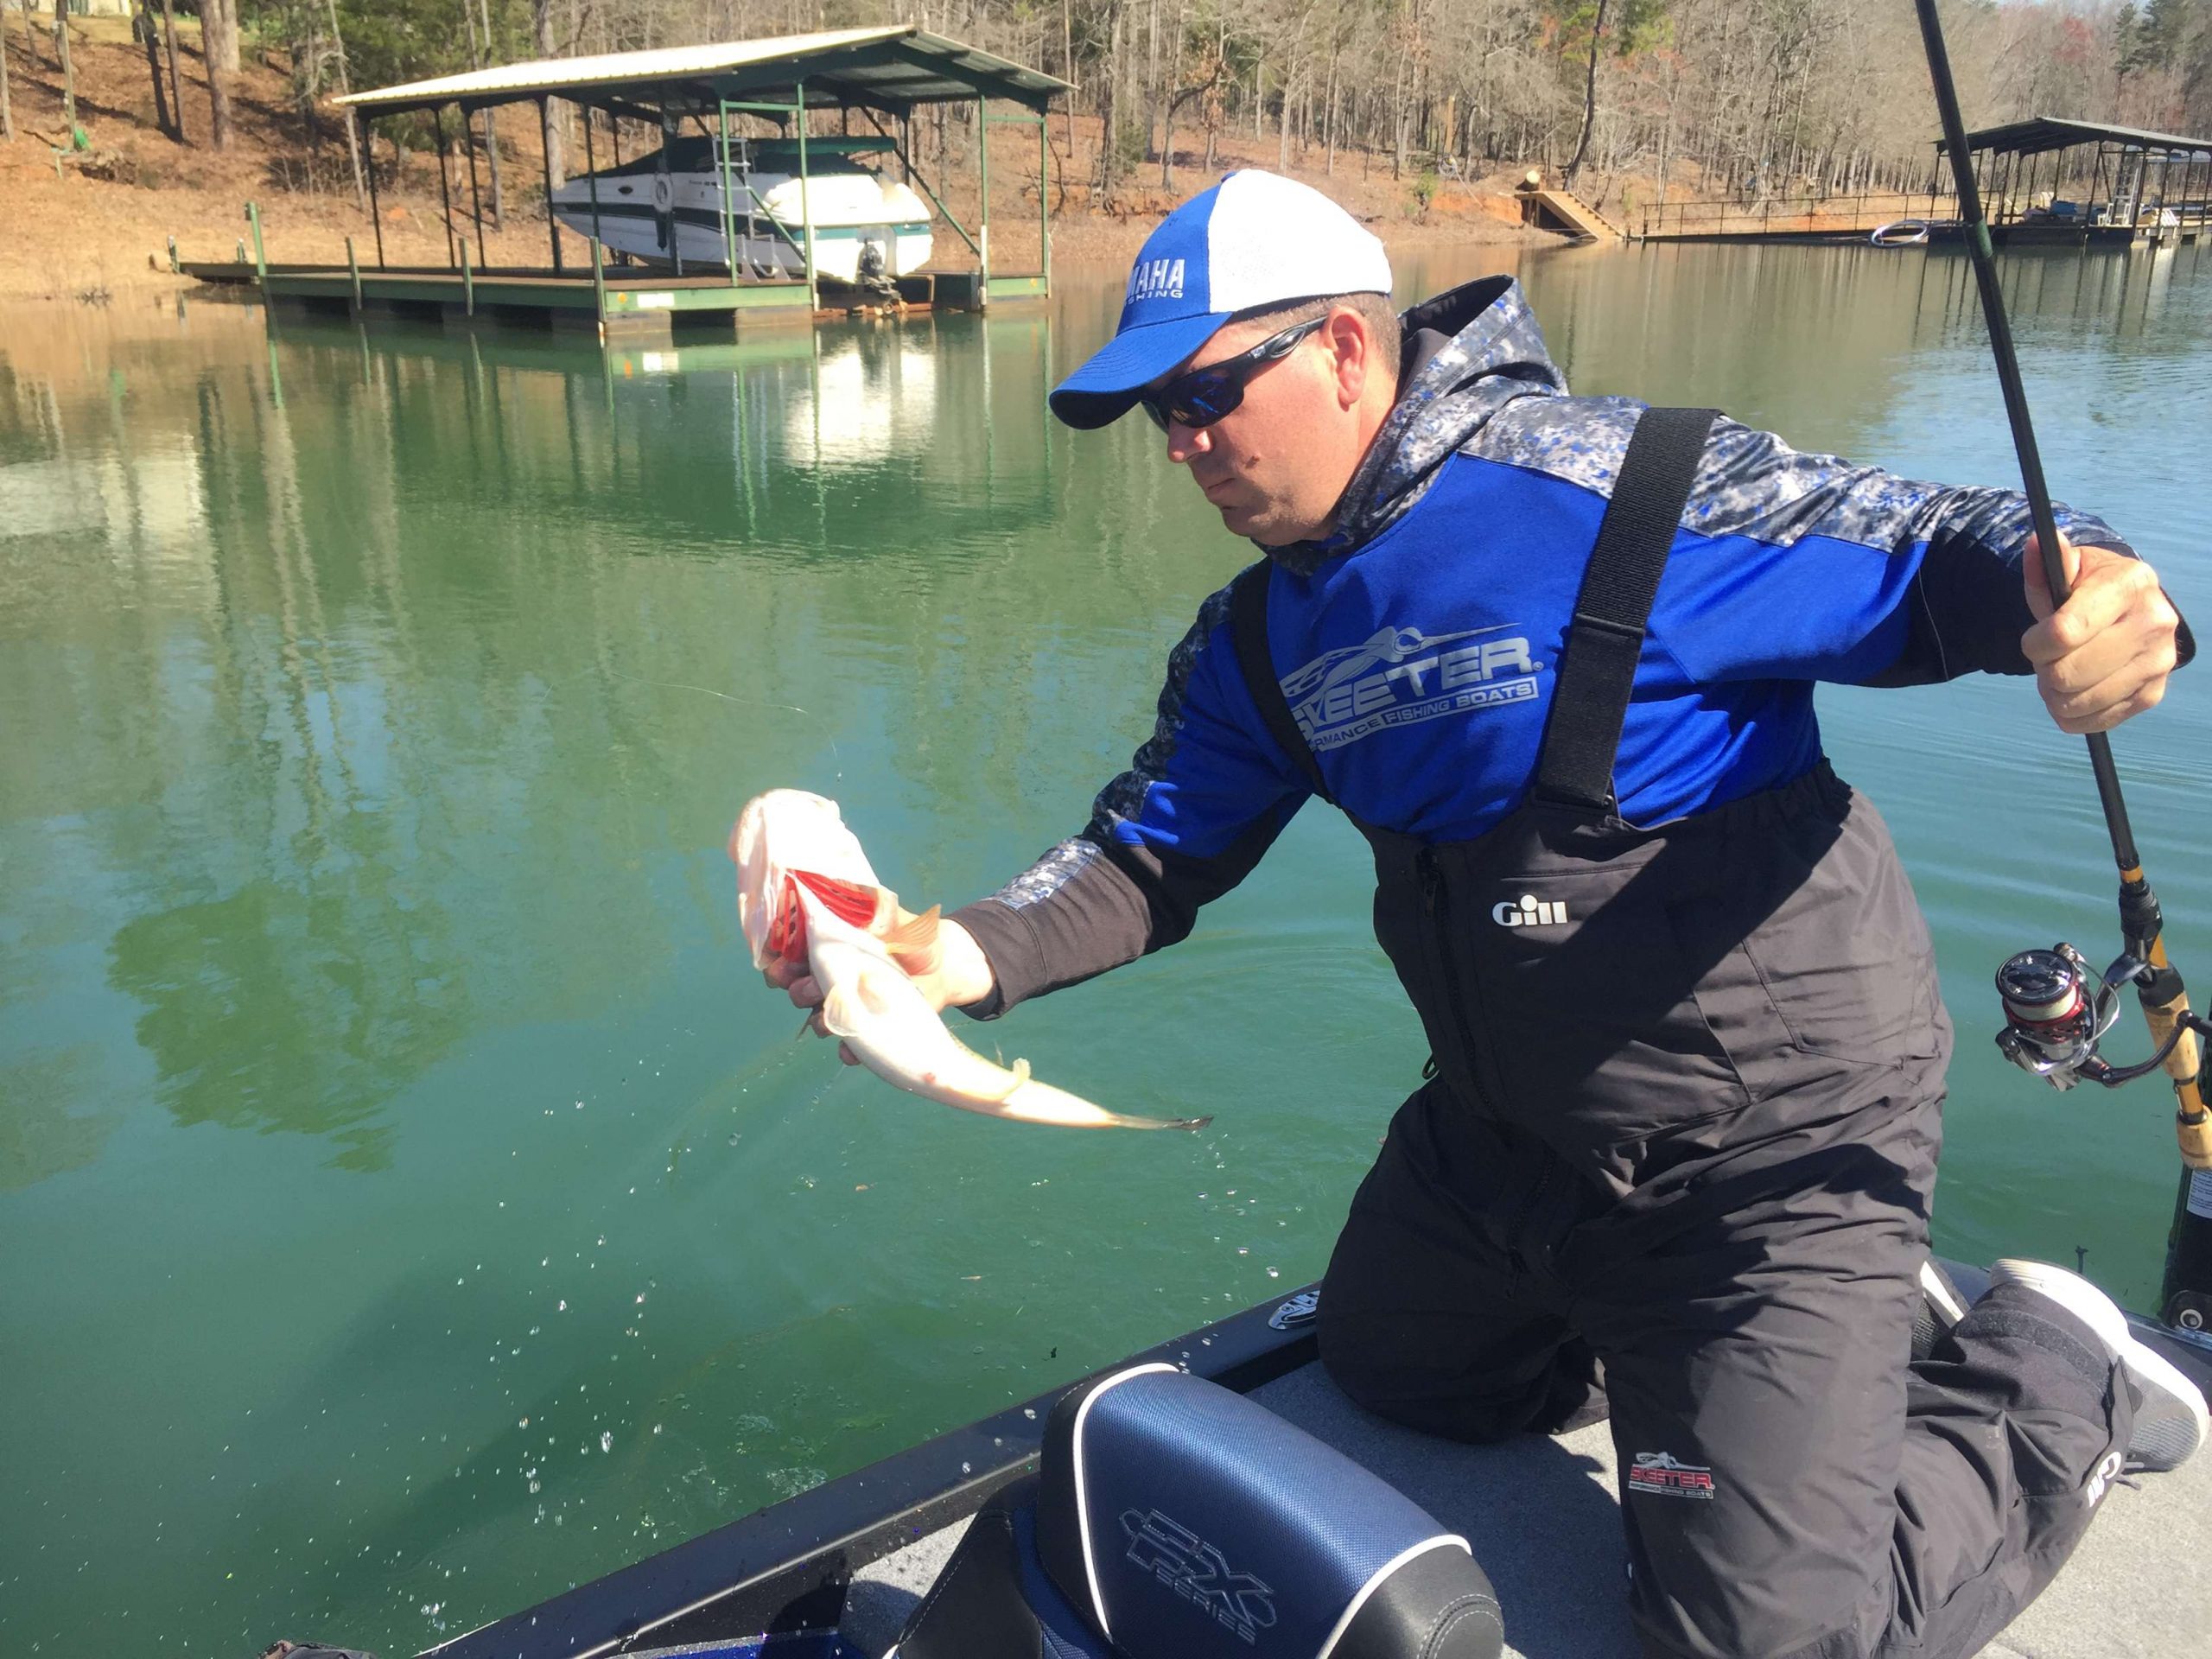 Pace gets his fourth fish in the boat.